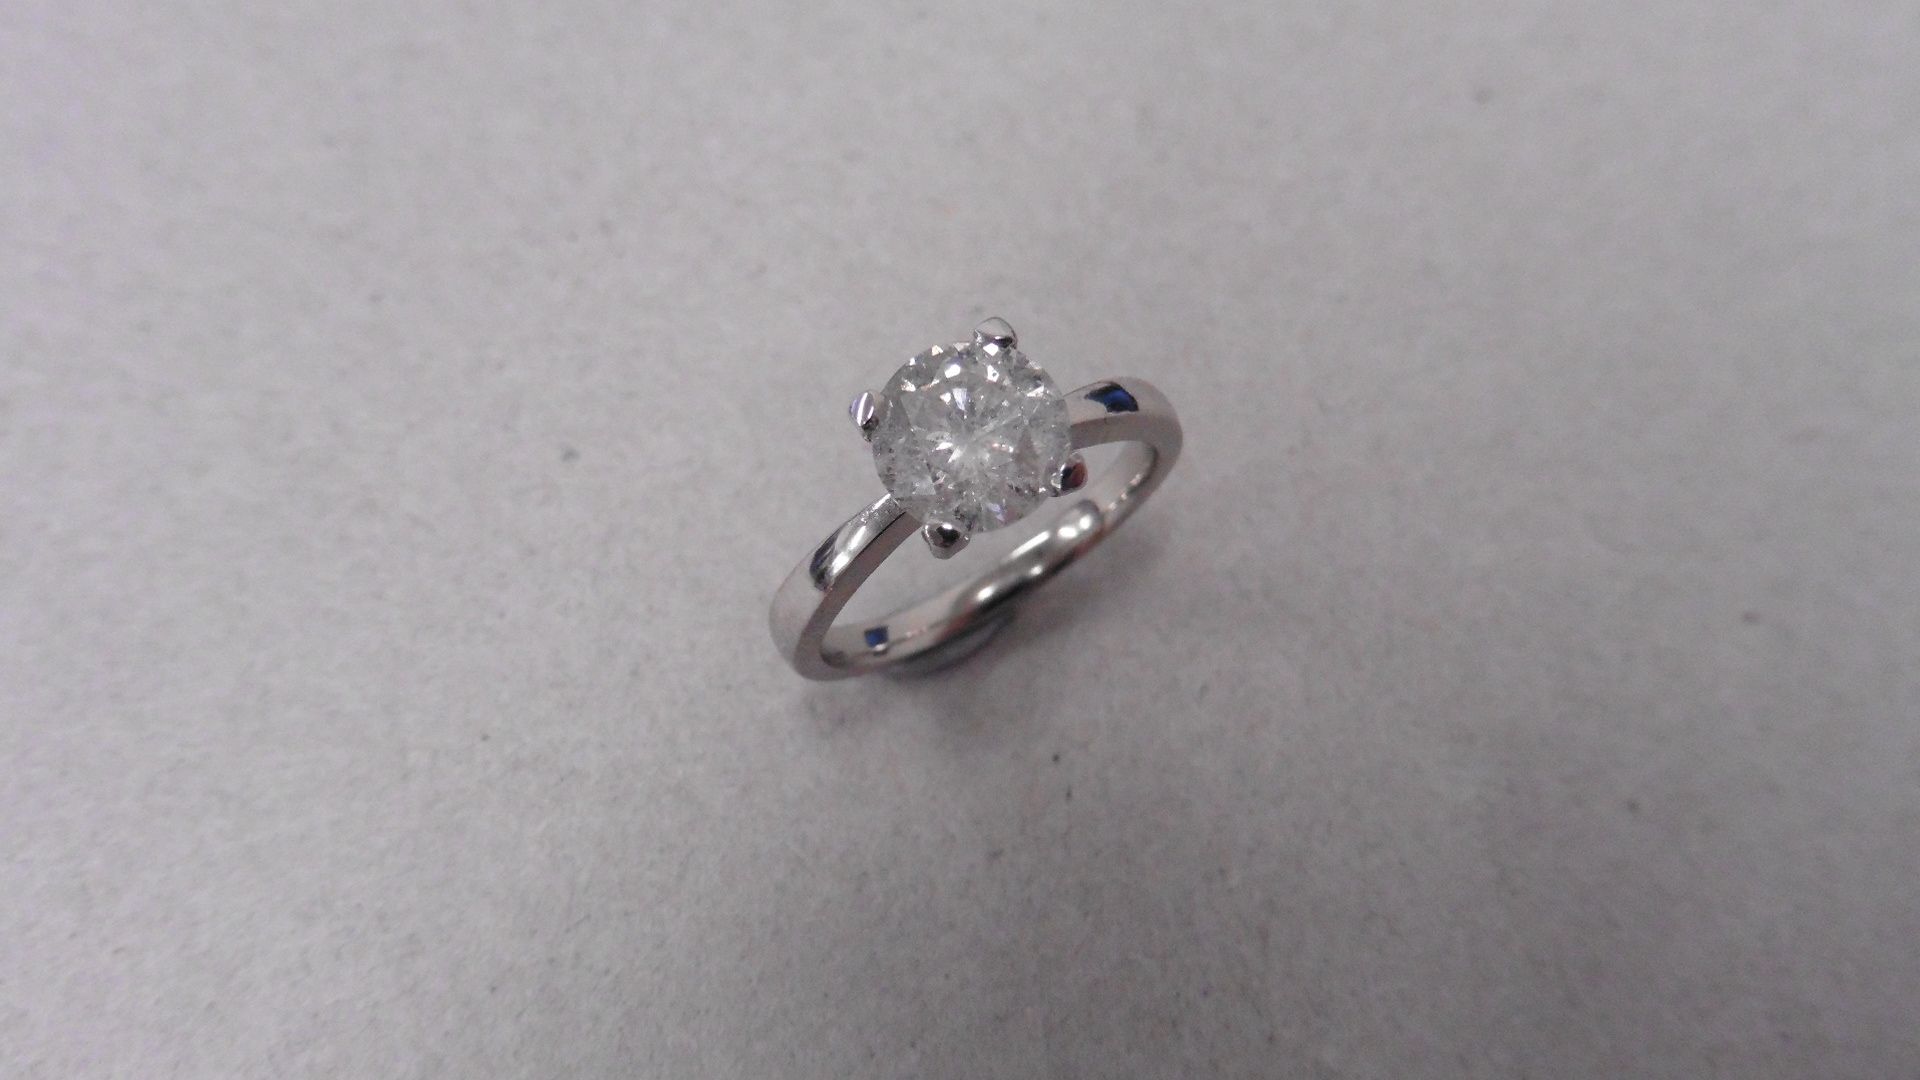 1.50ct diamond solitaire ring set in platinum. Enchanced diamond, H colour and I2 clarity. 4 claw